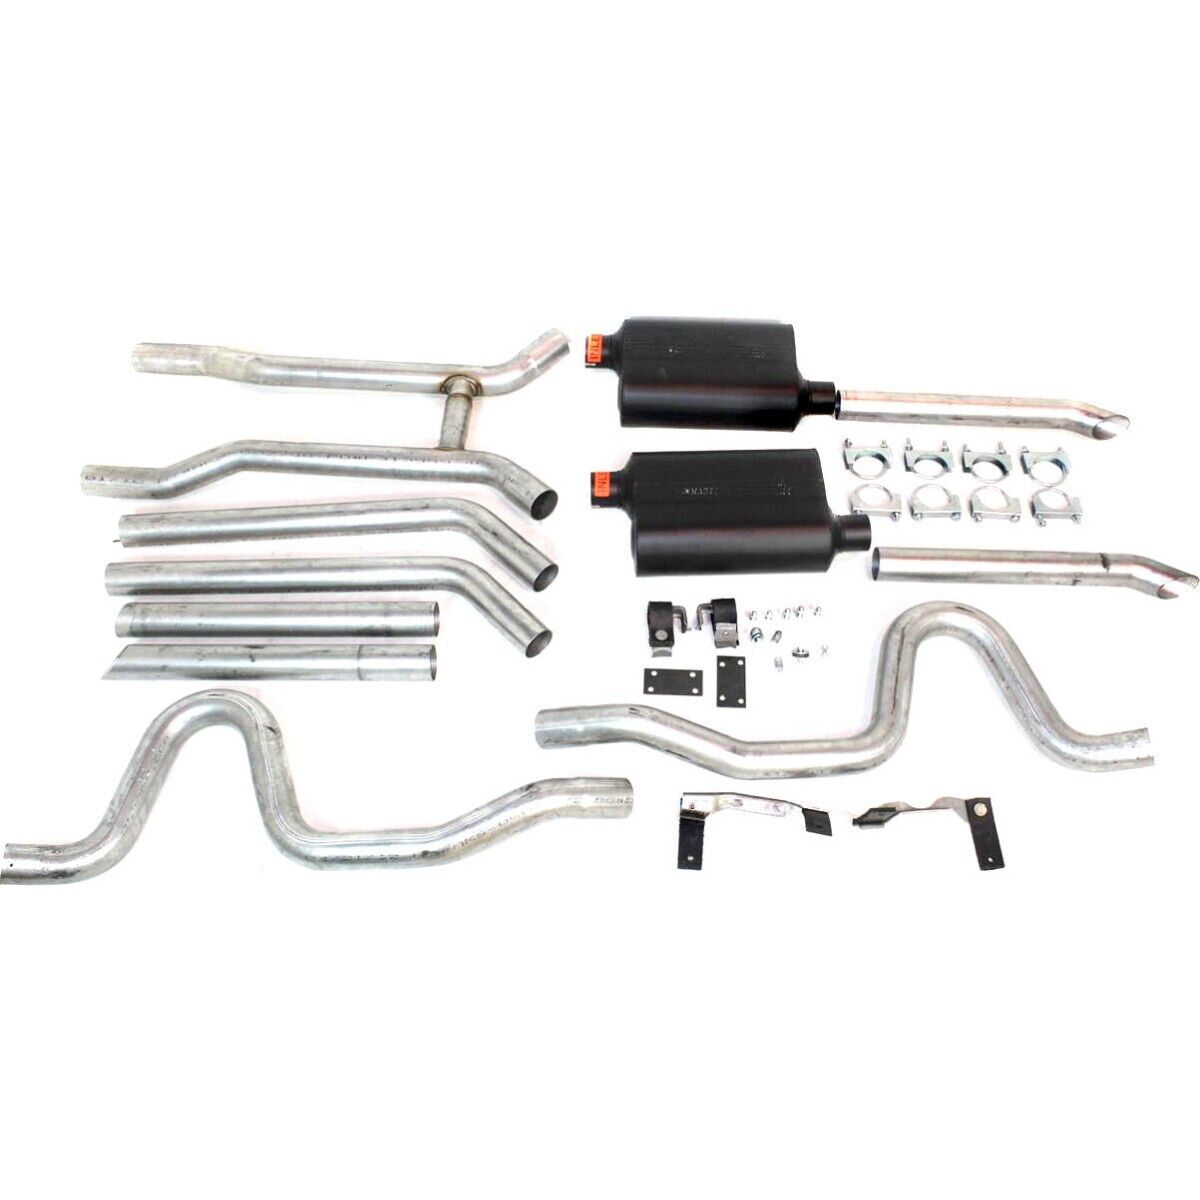 17119 Flowmaster Exhaust System for Chevy Olds Cutlass Chevrolet Malibu Camaro